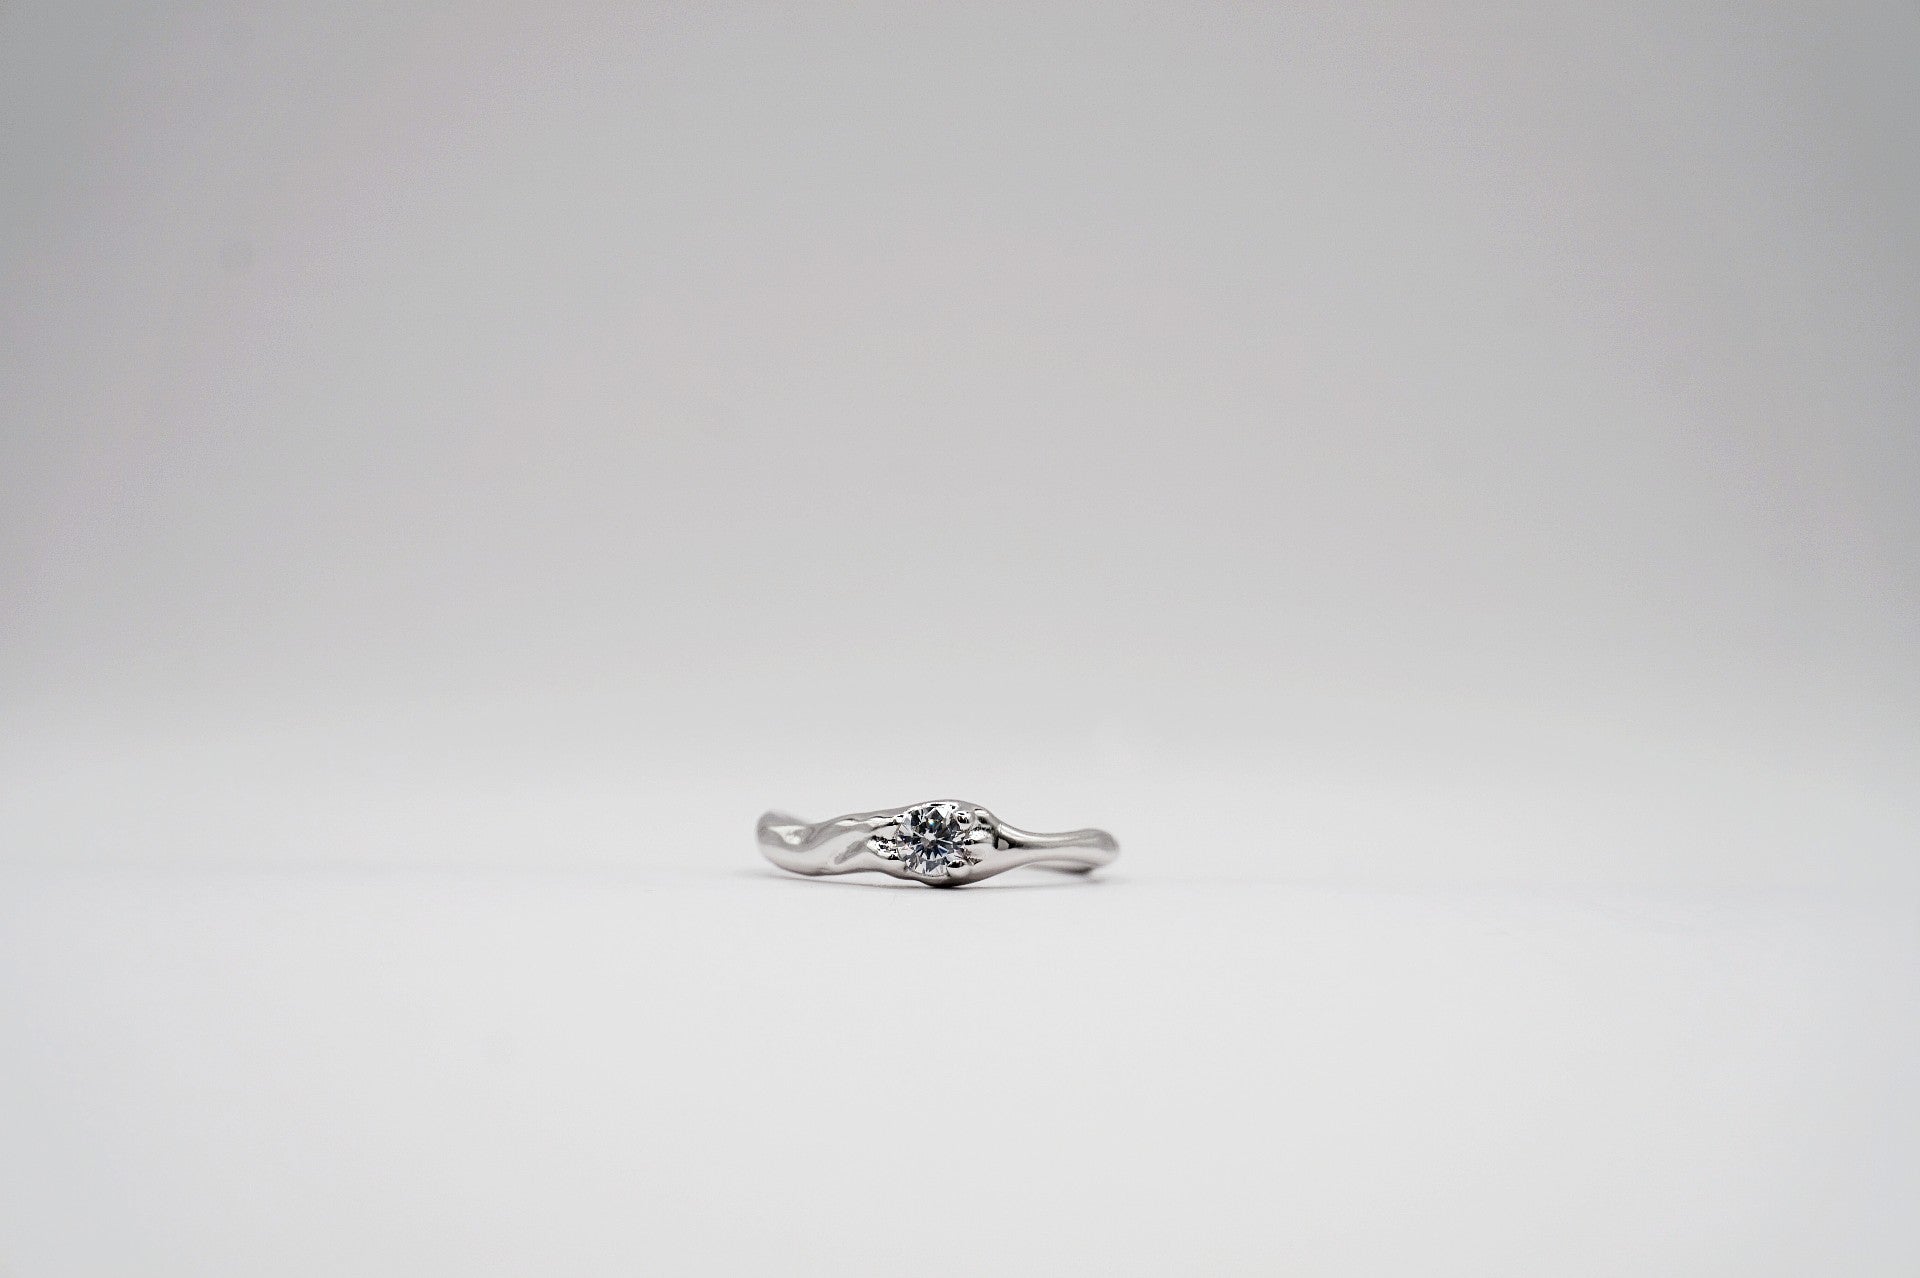 Emilia Ring from Third Tone. Simple dainty silver ring women.